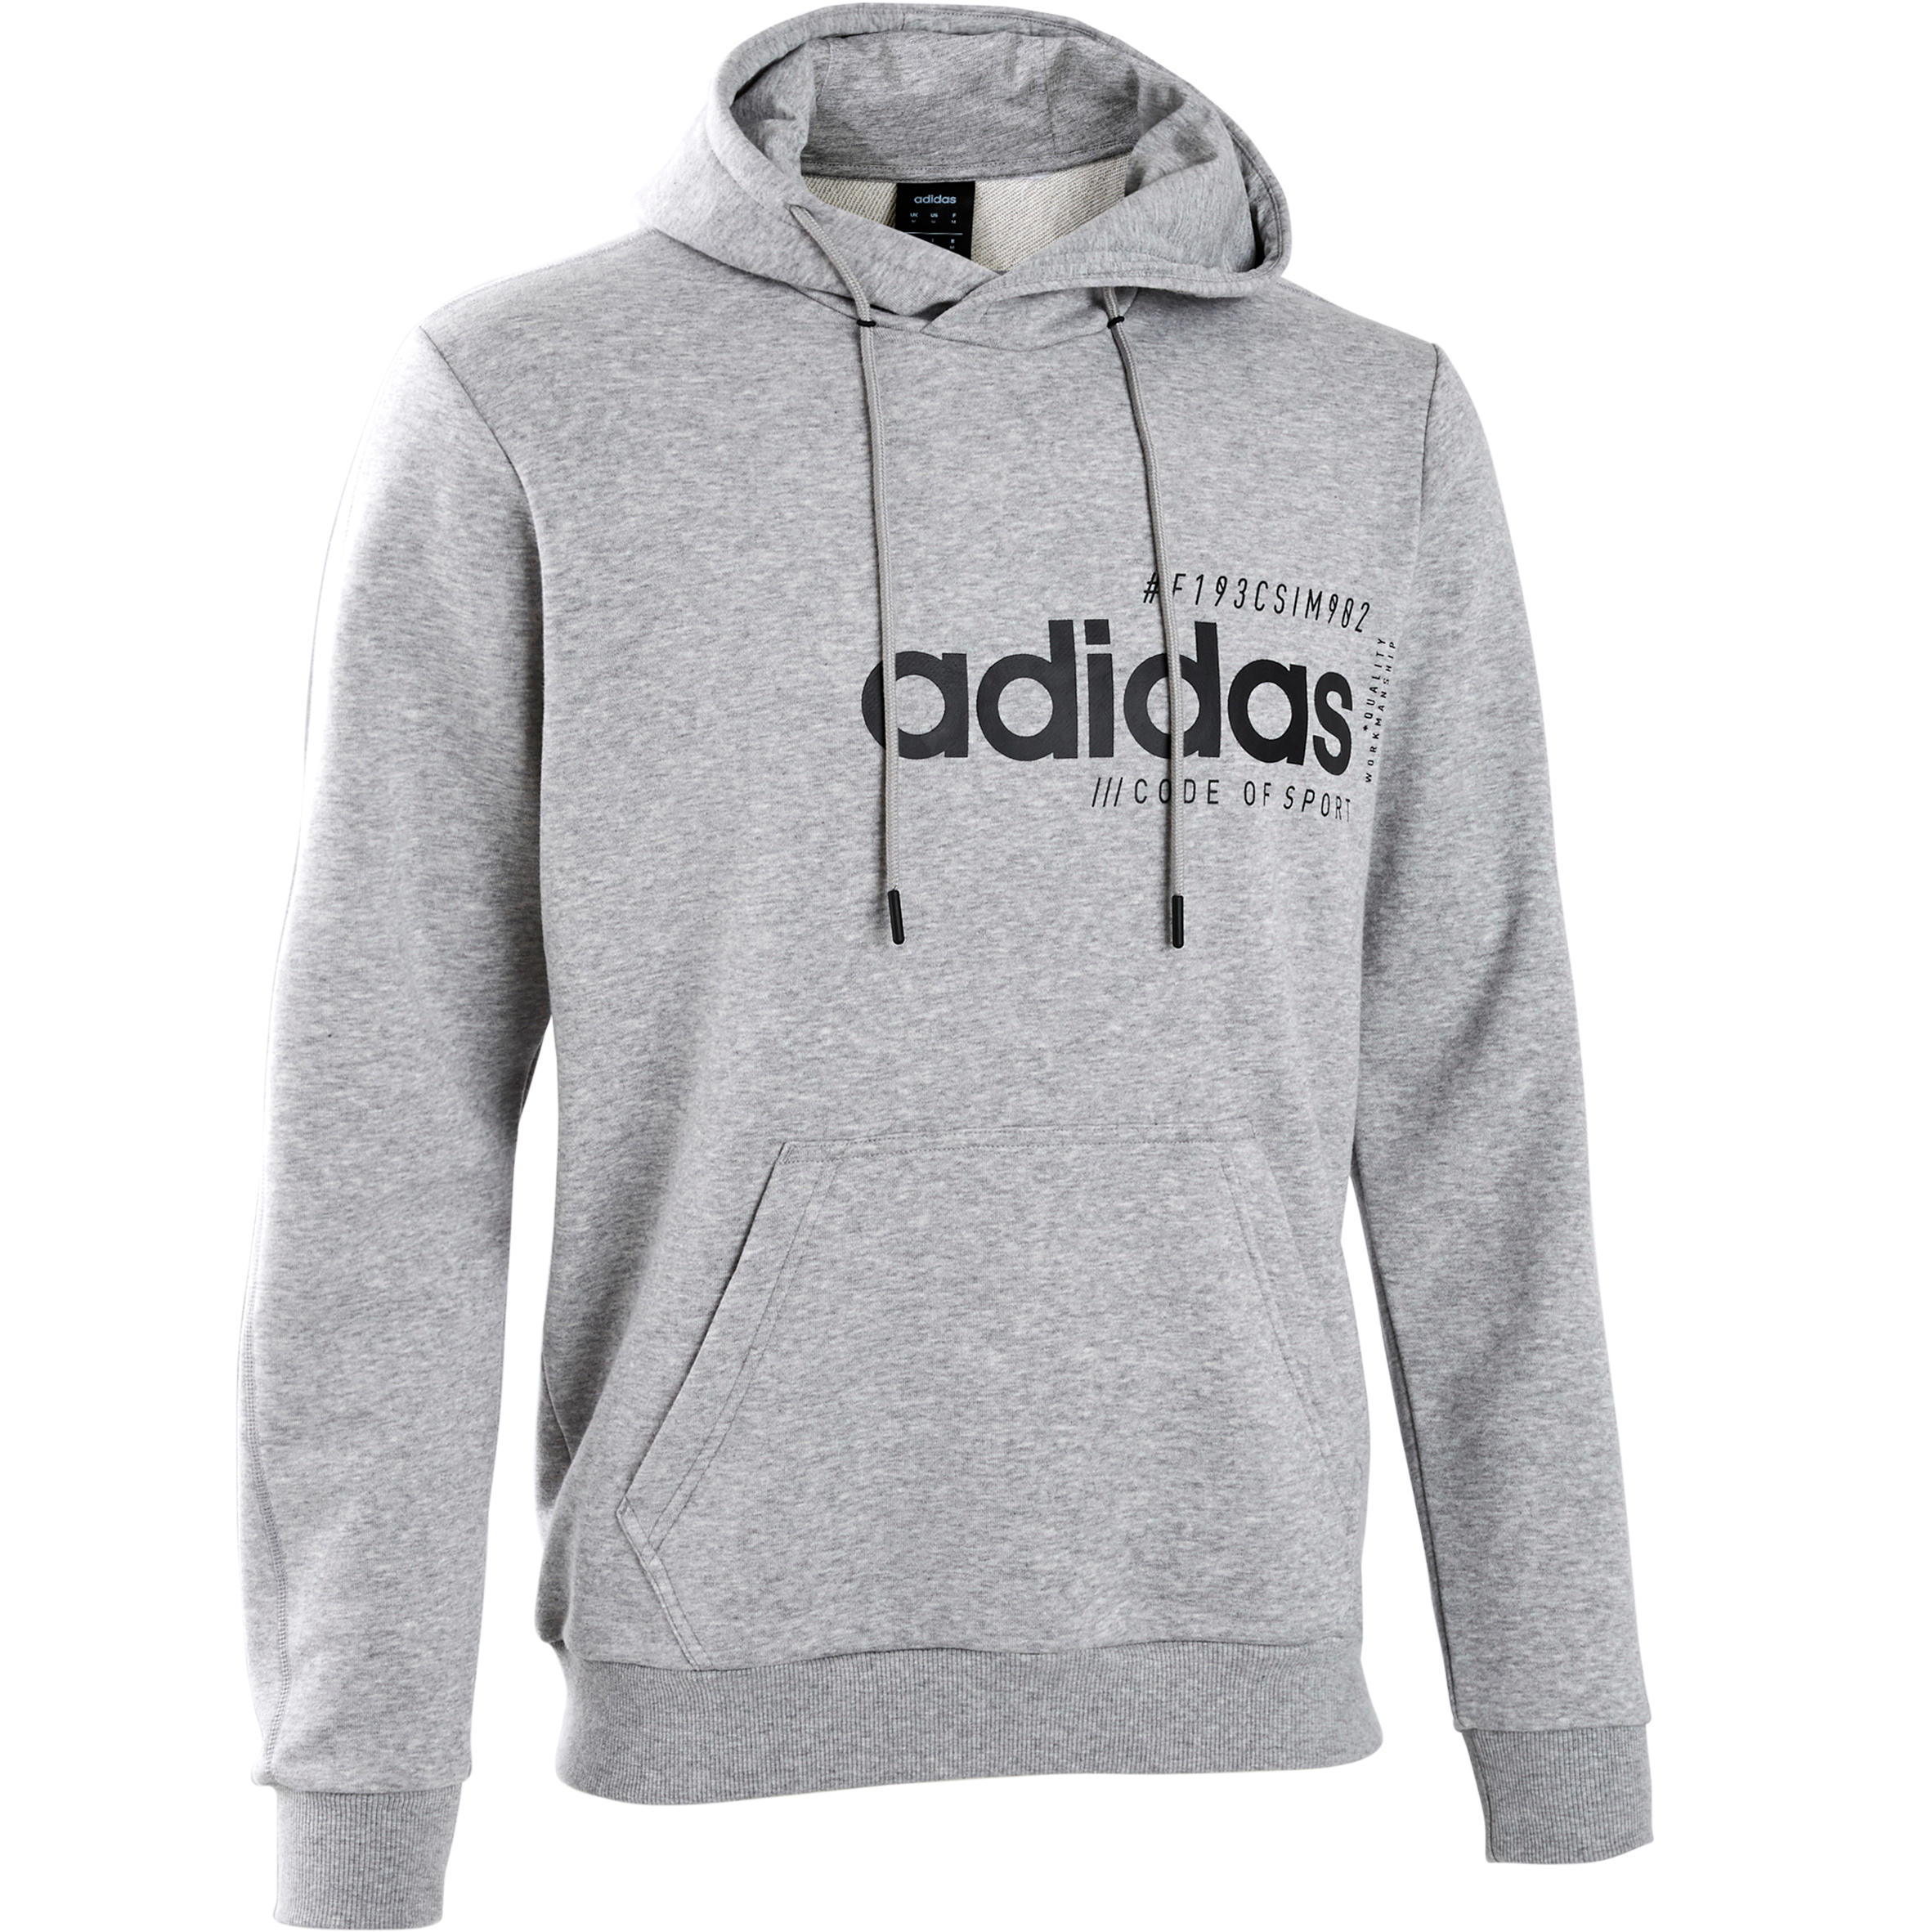 sweat adidas homme gris